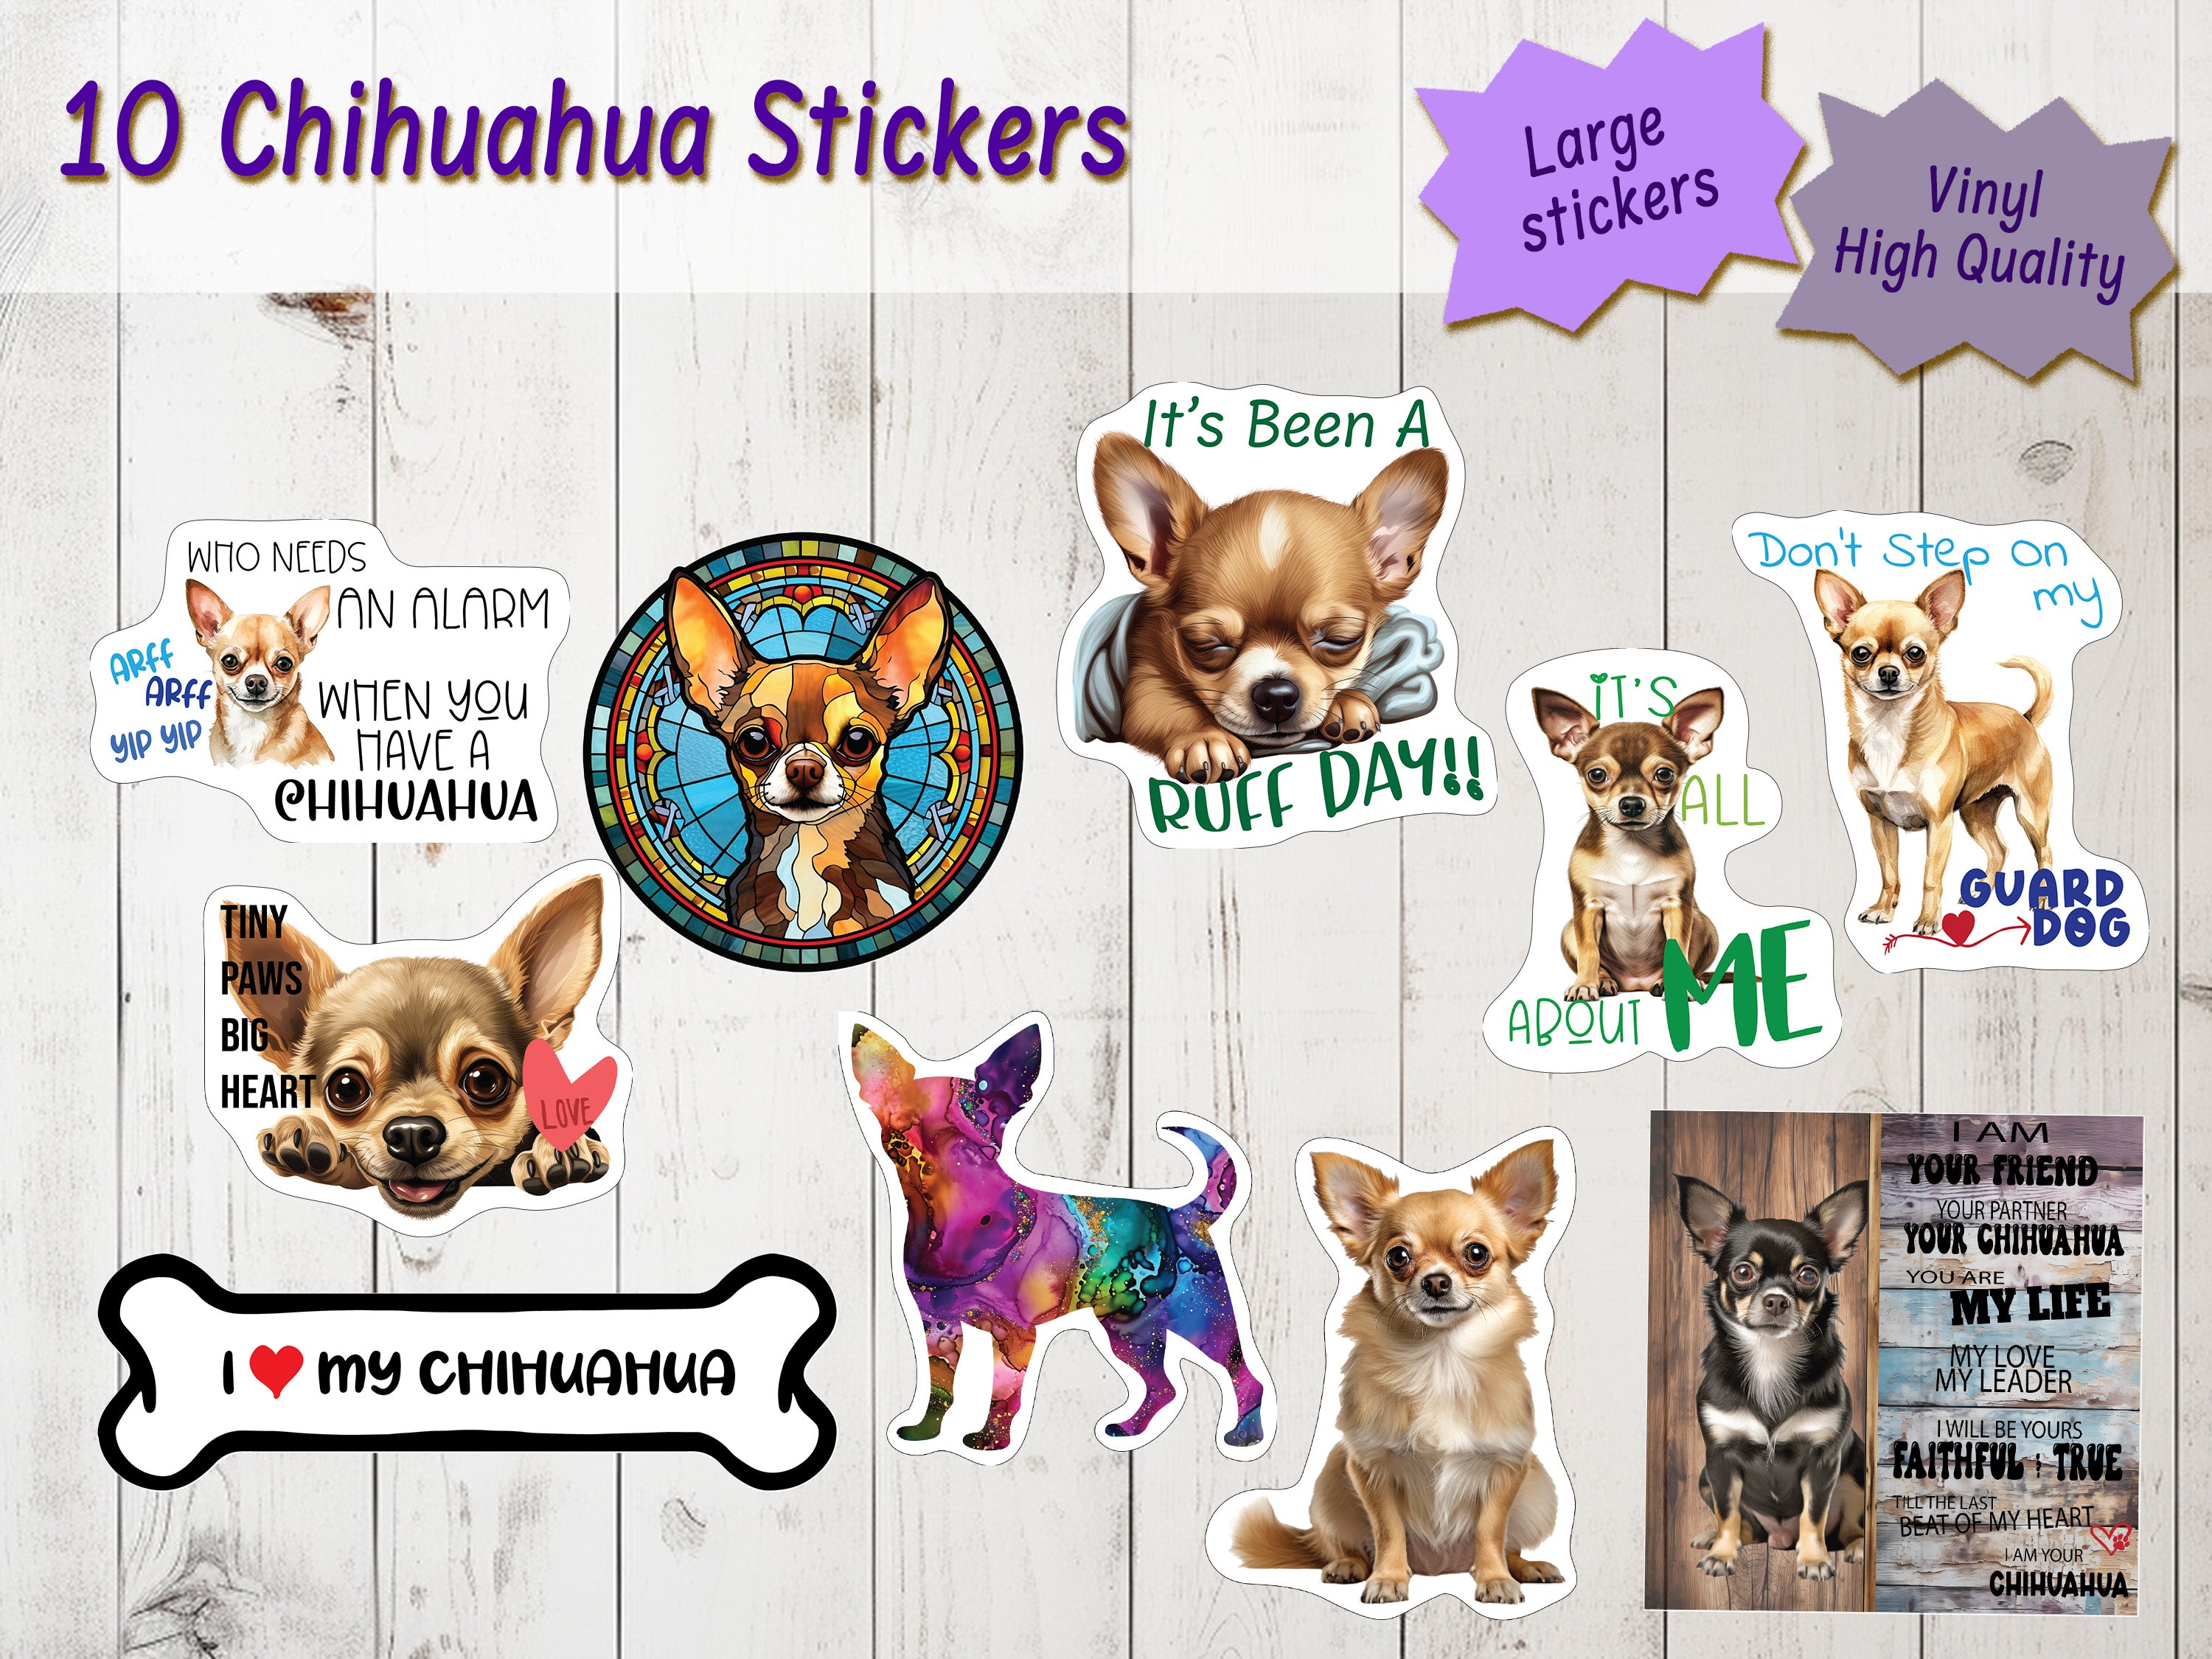 Chihuahua Stickers